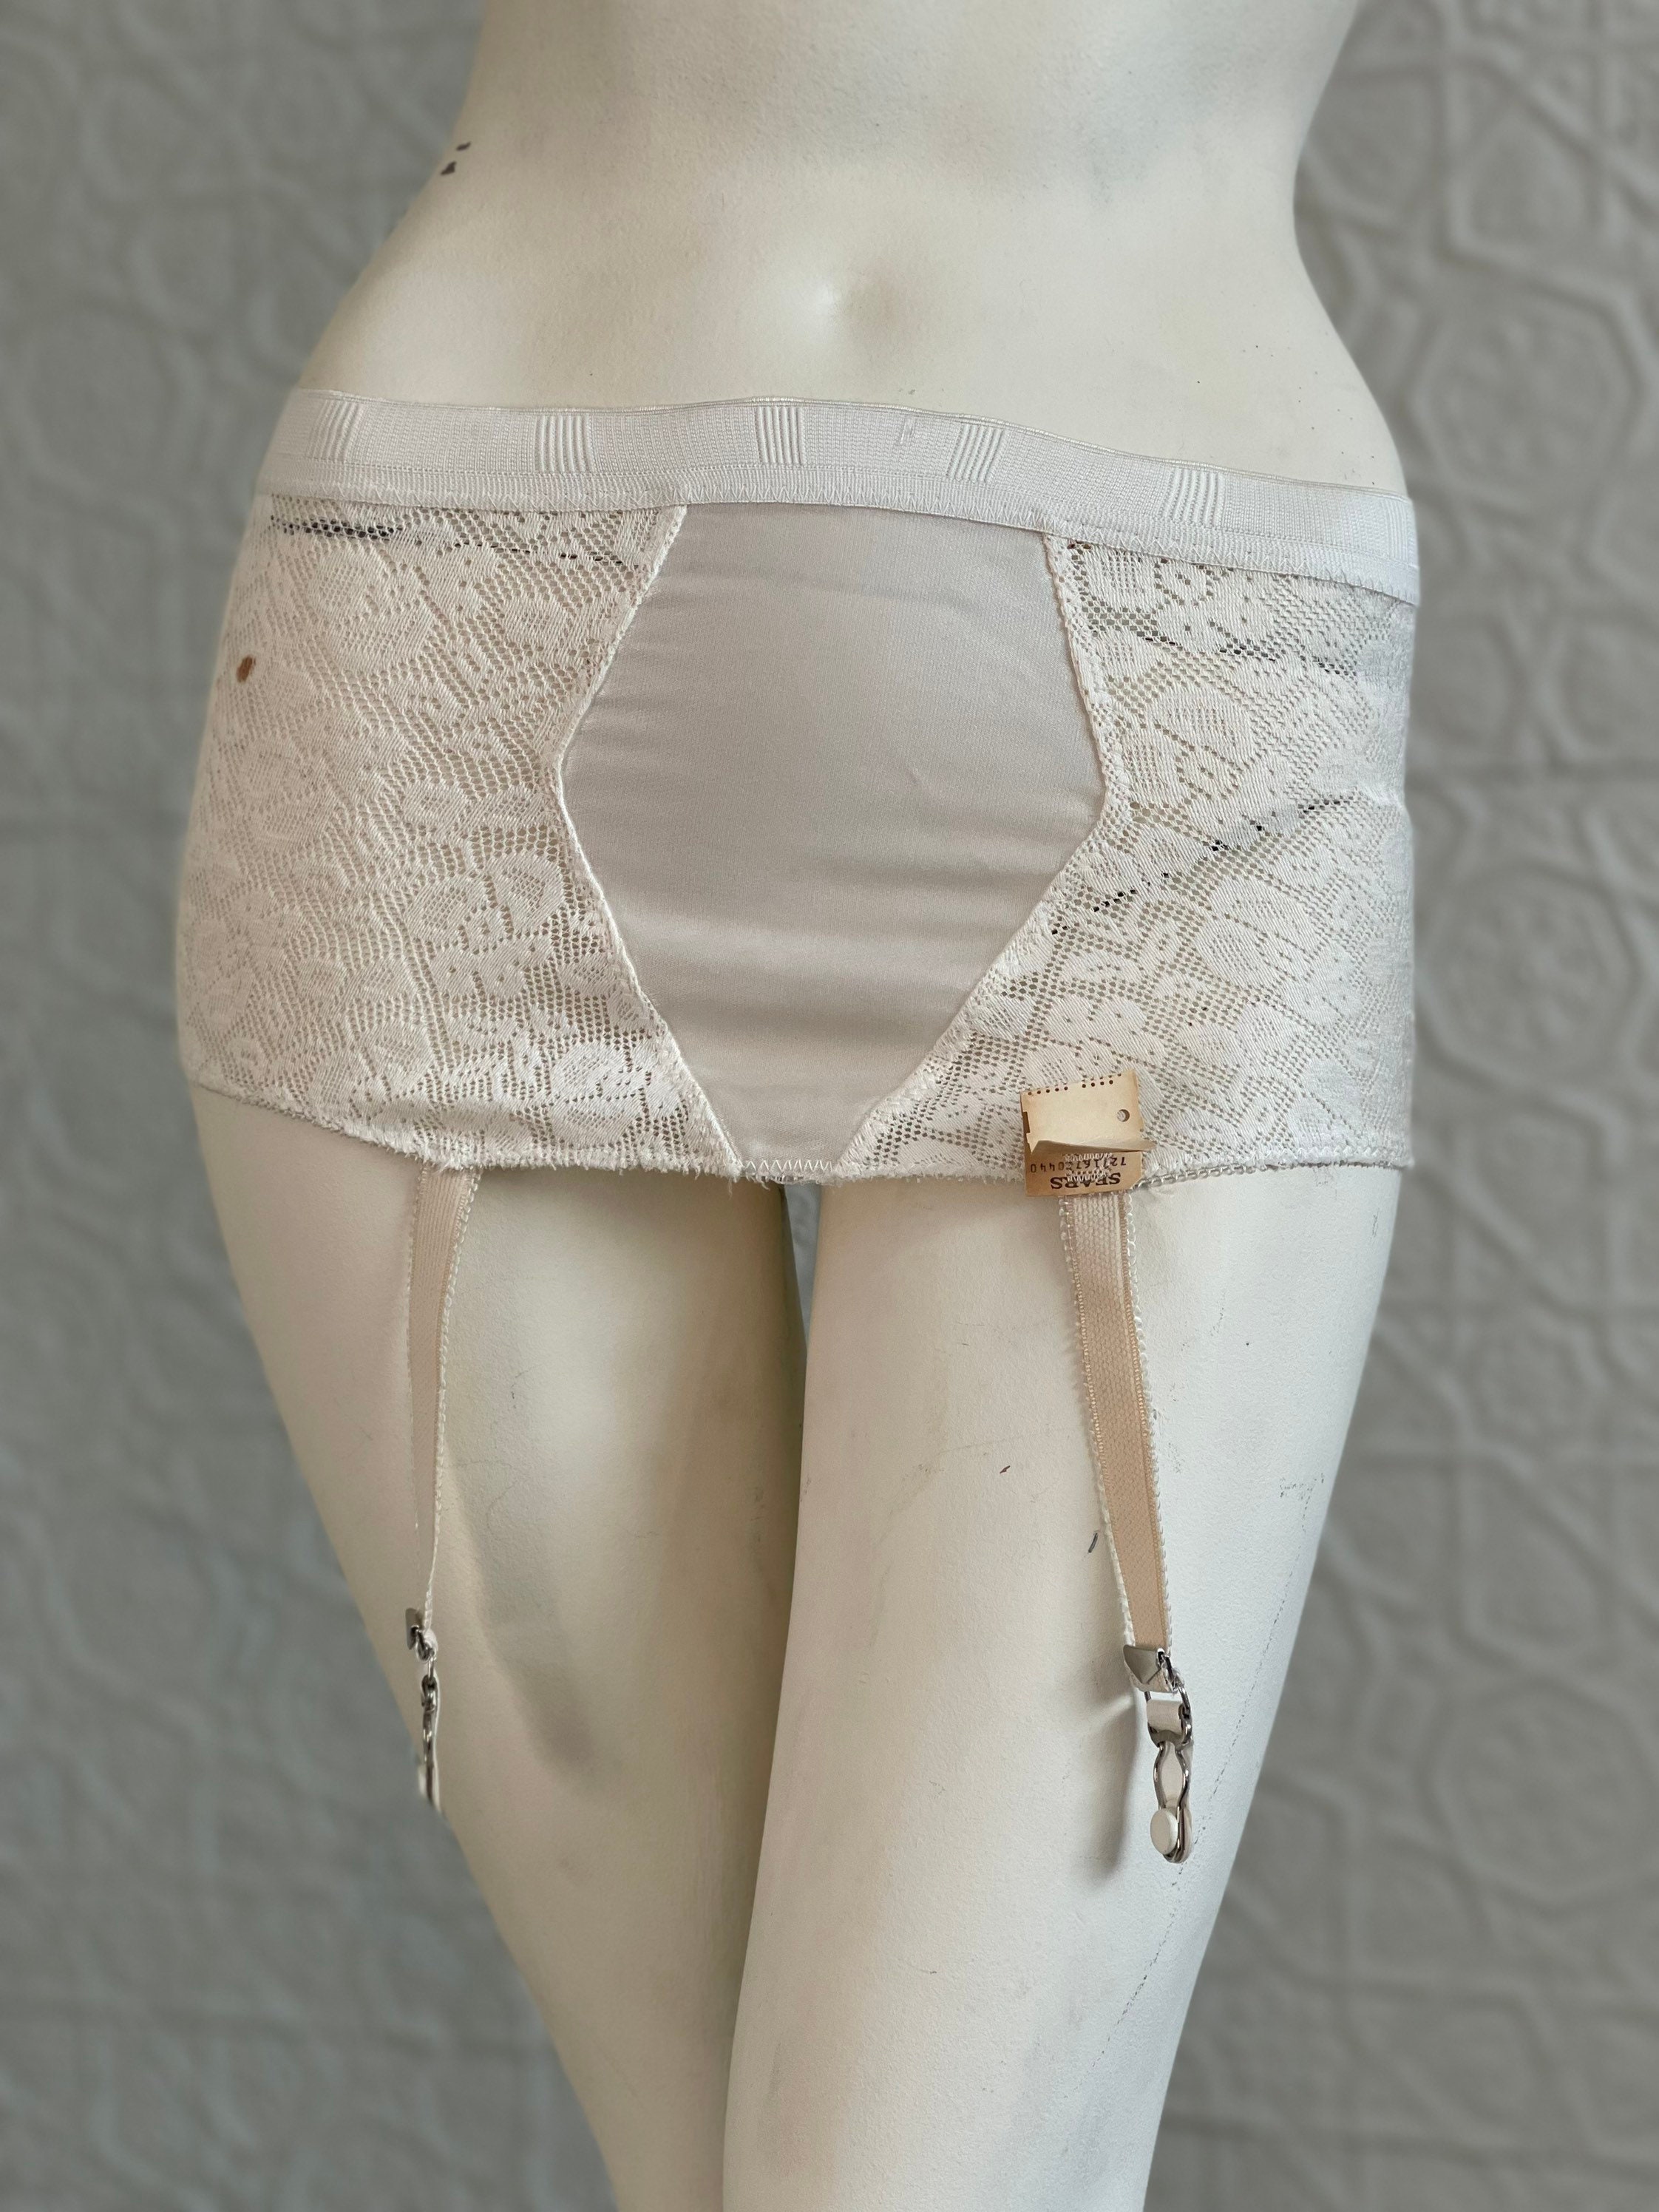 Midcentury Shaping Girdle-garter Belt-white Lace-spandex-new Old  Stock-small Waist Cincher-lingerie-corset-shapewear-50s-60s Vintage 